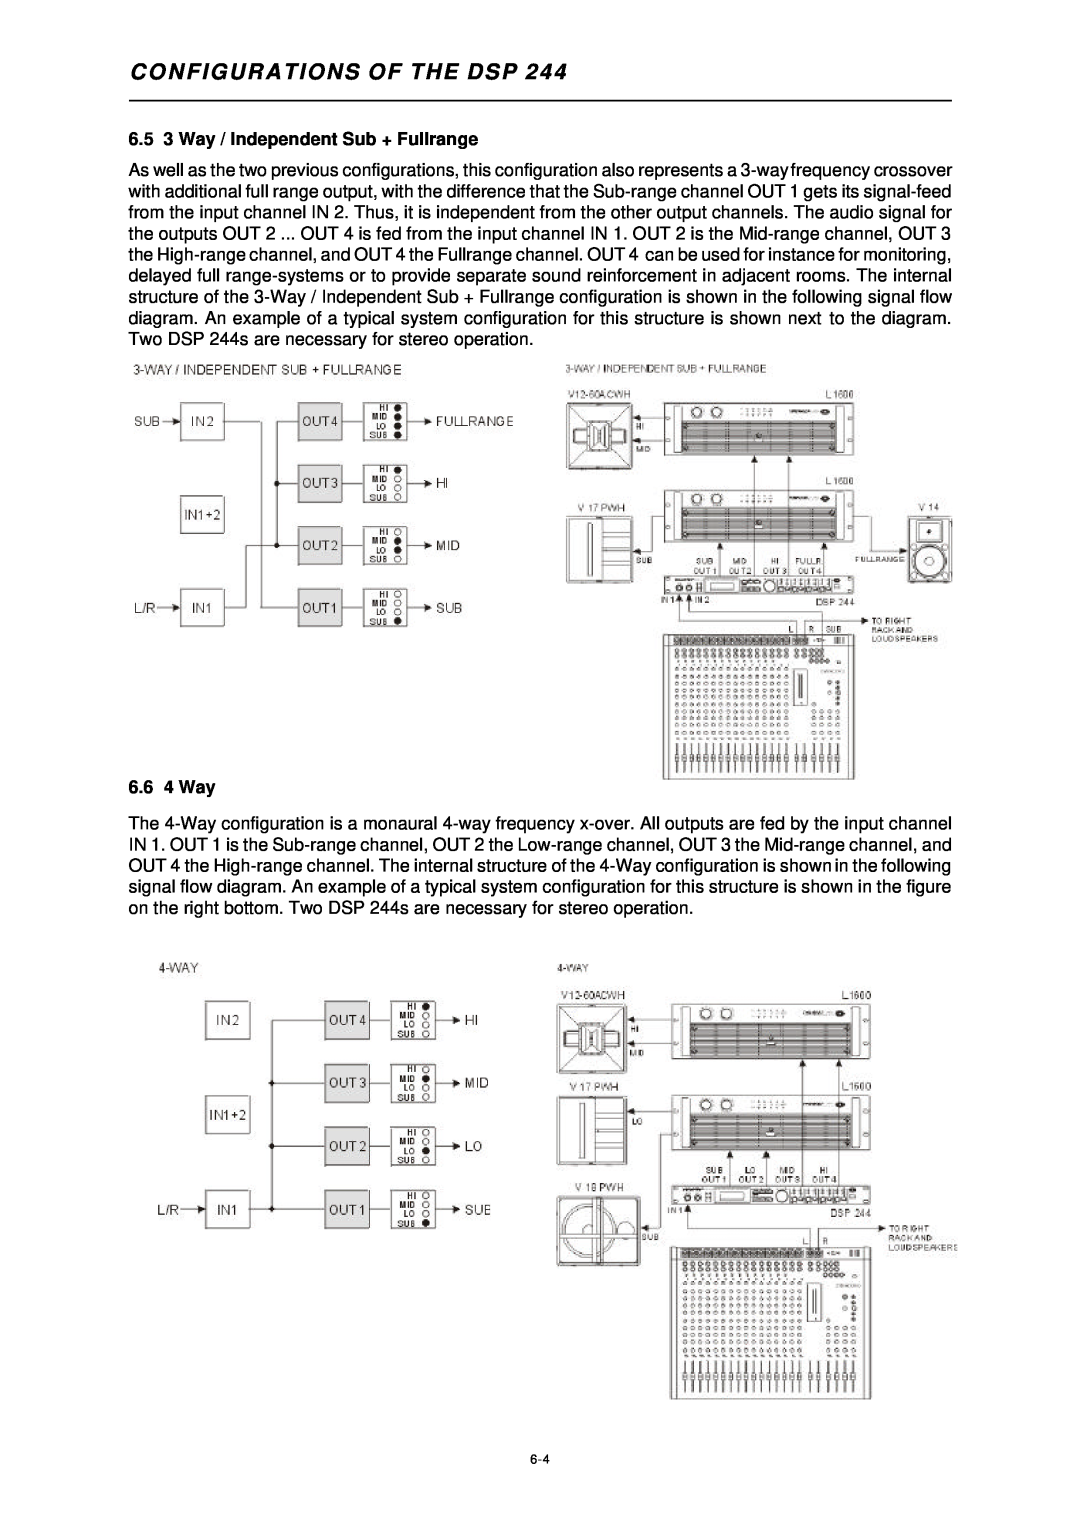 Dynacord DSP 244 owner manual 6.5 3 Way / Independent Sub + Fullrange, 6.6 4 Way, C O N Figurations Of The Dsp 